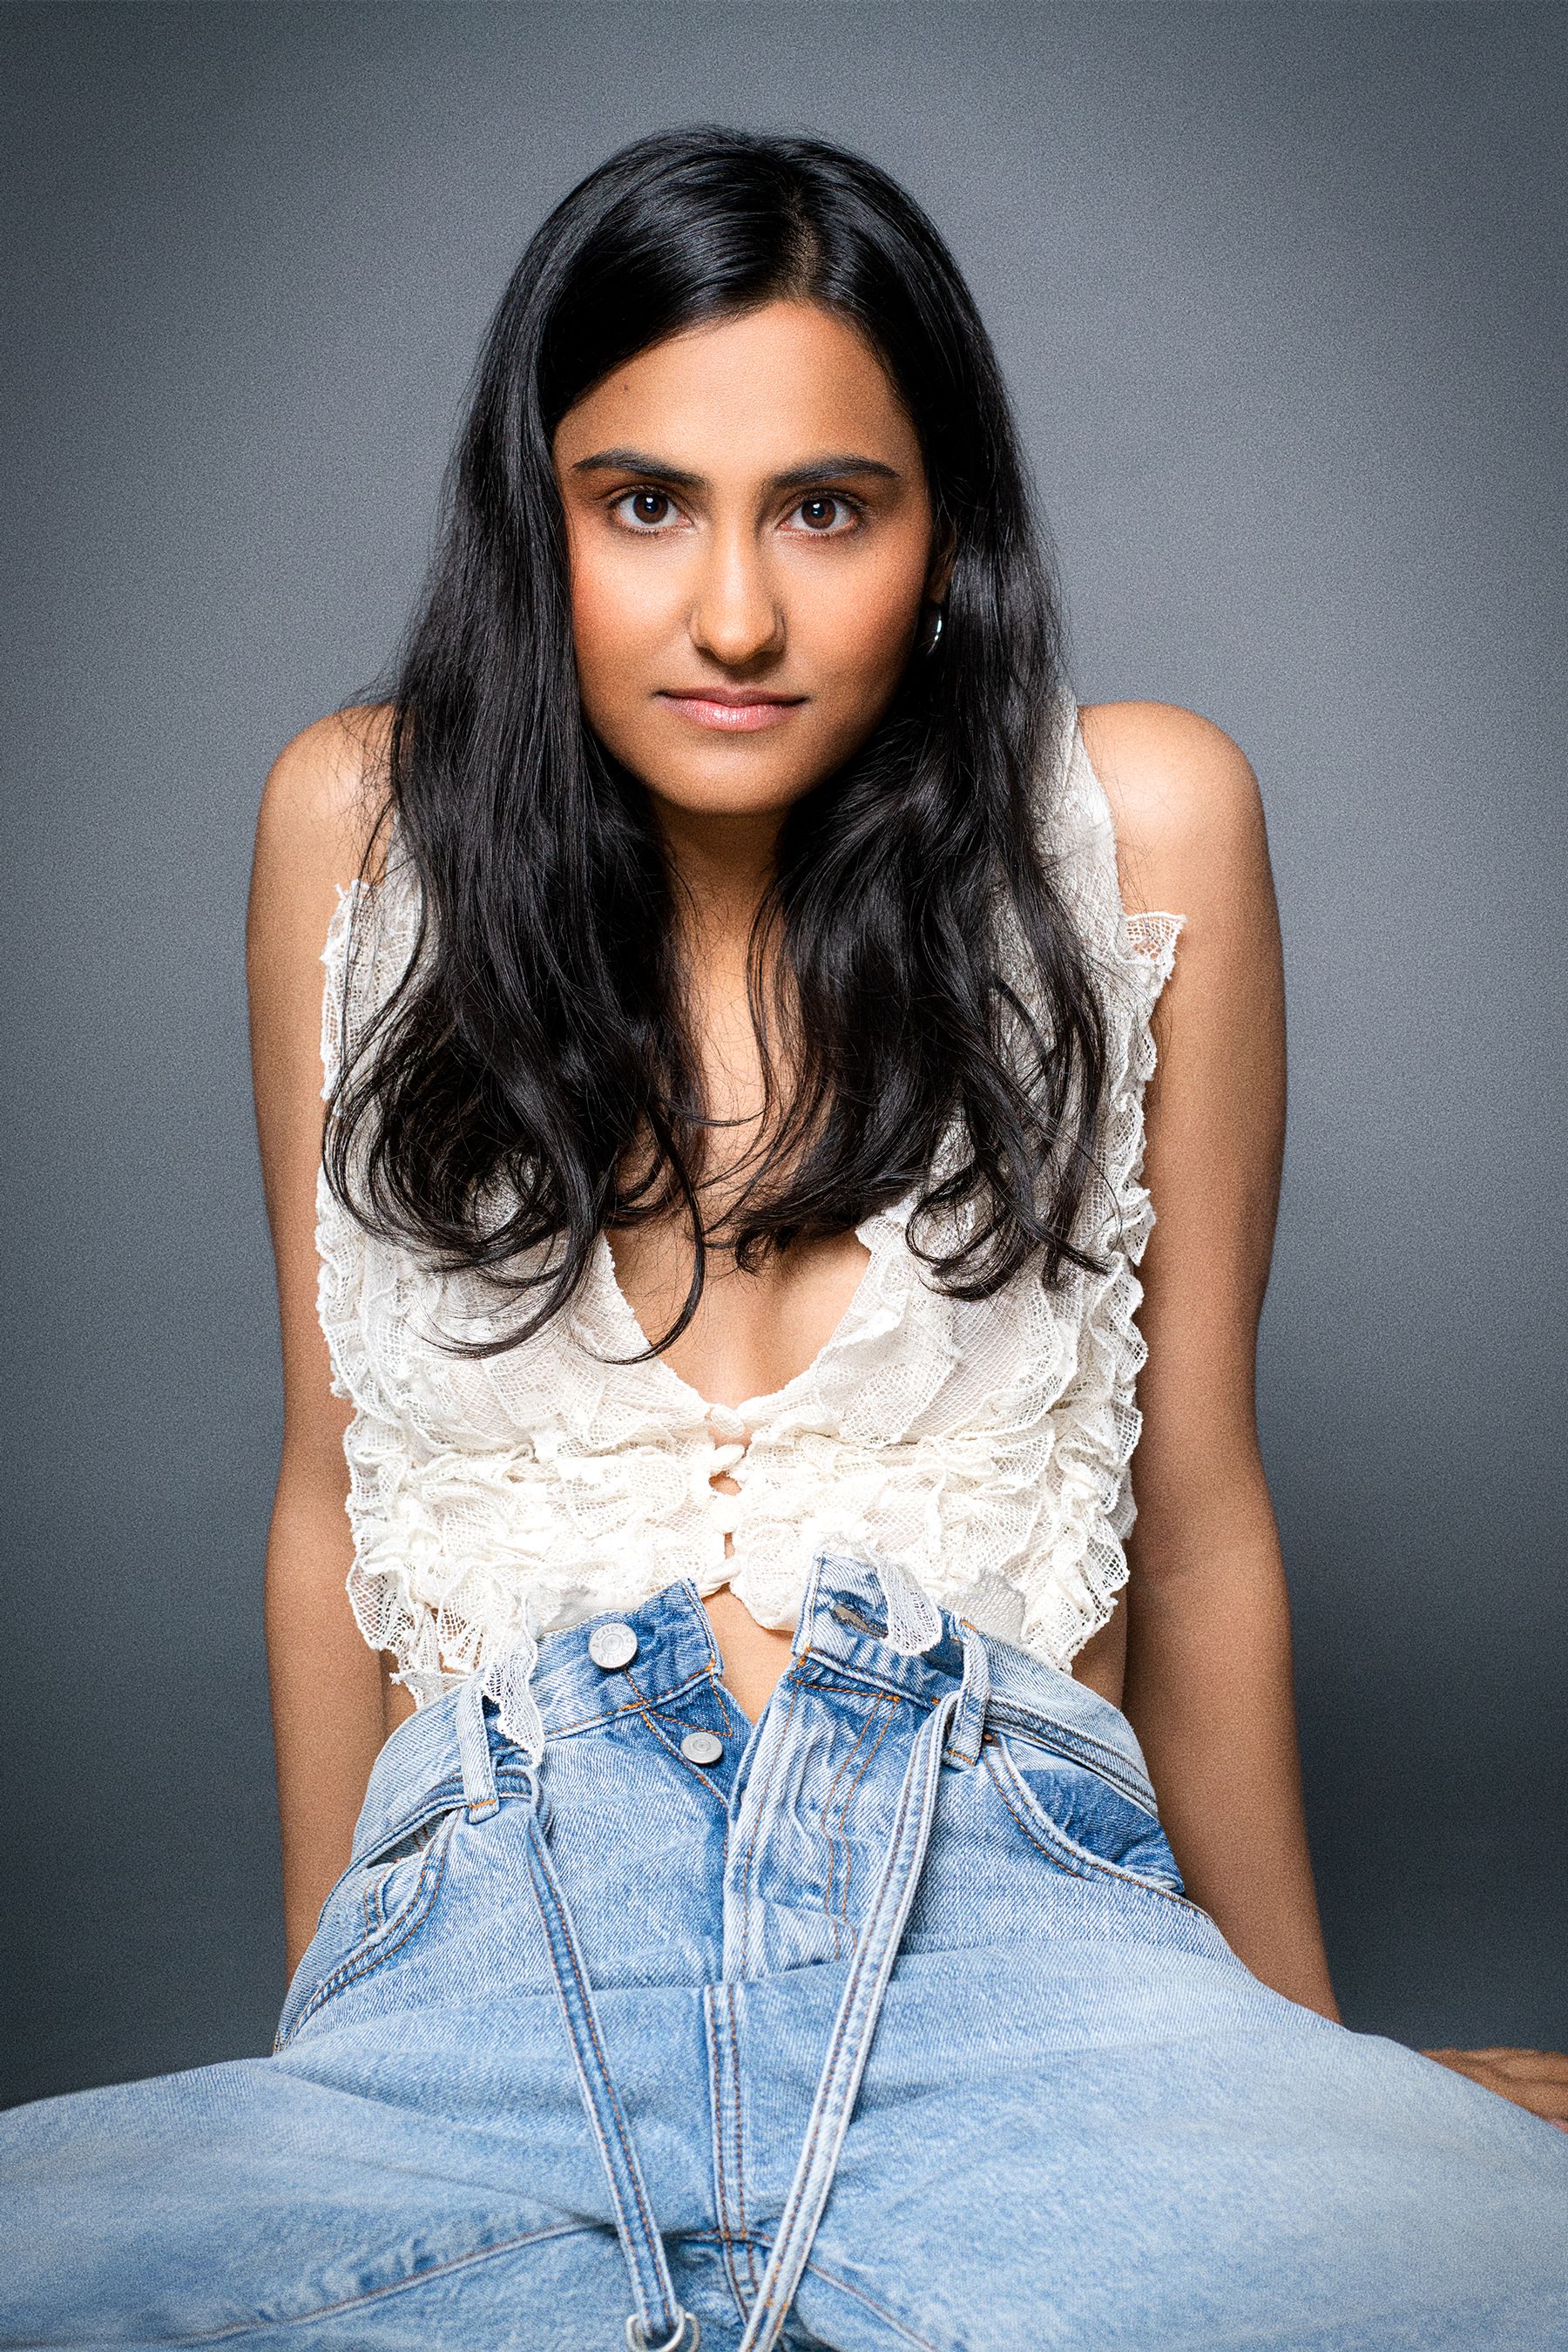 The Sex Lives of College Girls Star Amrit Kaur Talks Defying Stereotypes